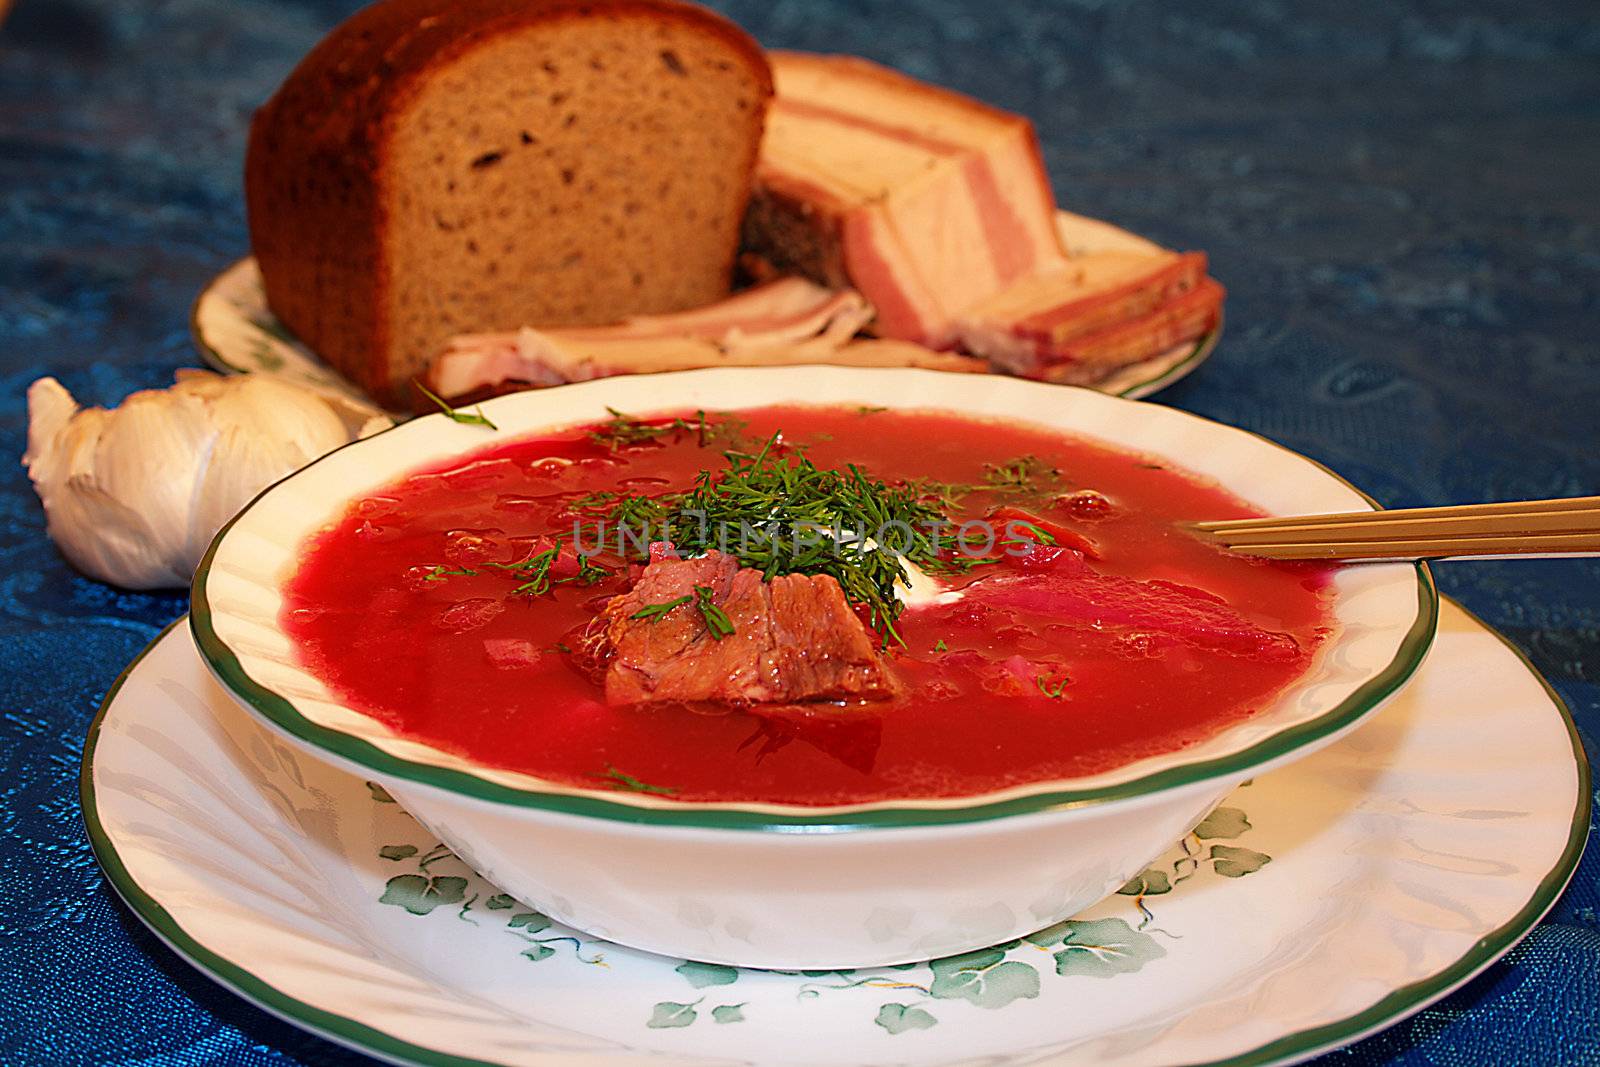 Borscht is a soup that is popular in many Eastern and Central European countries.